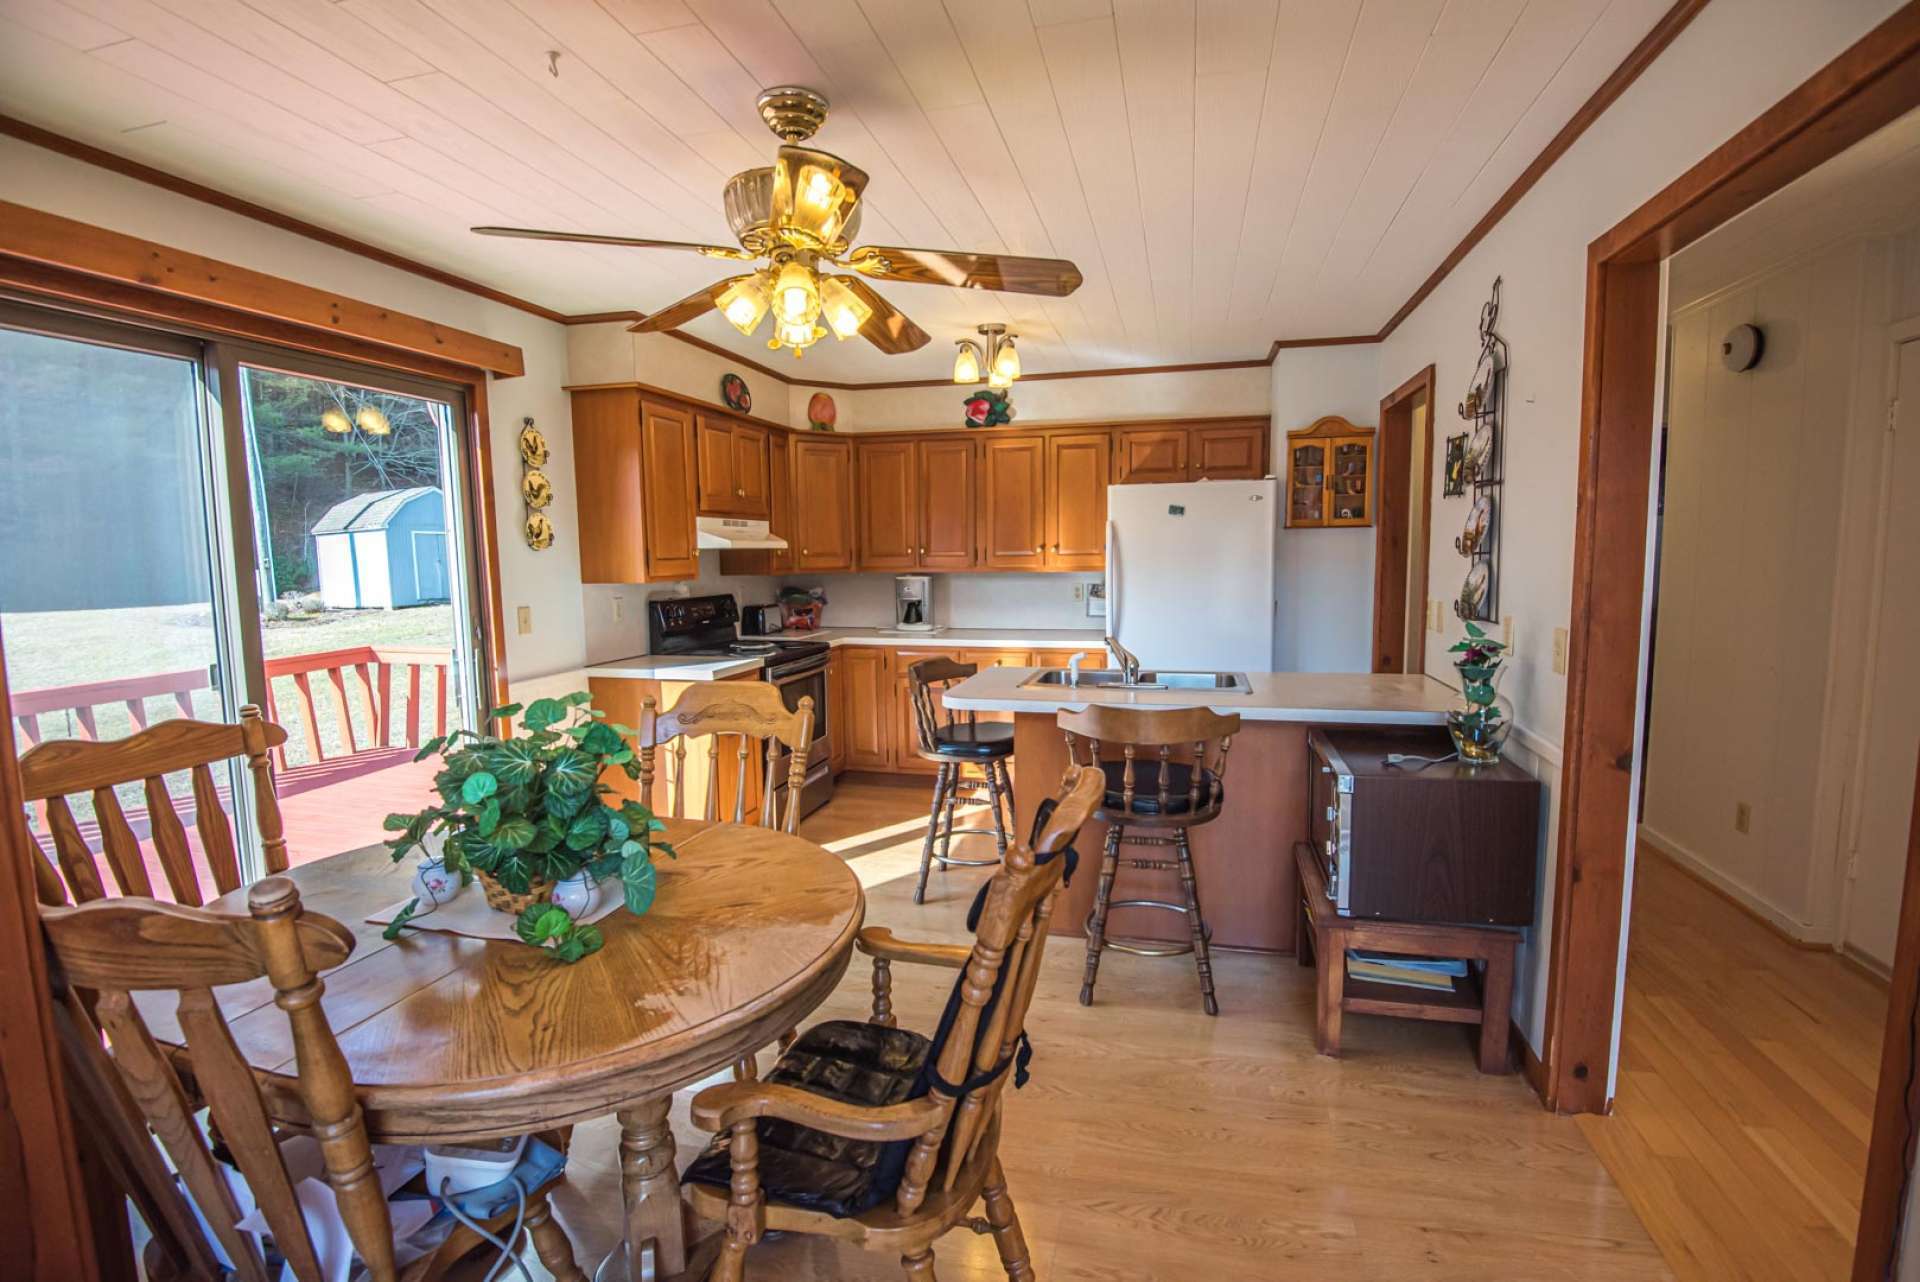 The kitchen offers plenty of work and storage space. The dining area and kitchen provides easy access to the back open deck when grilling, dining and entertaining outdoors.